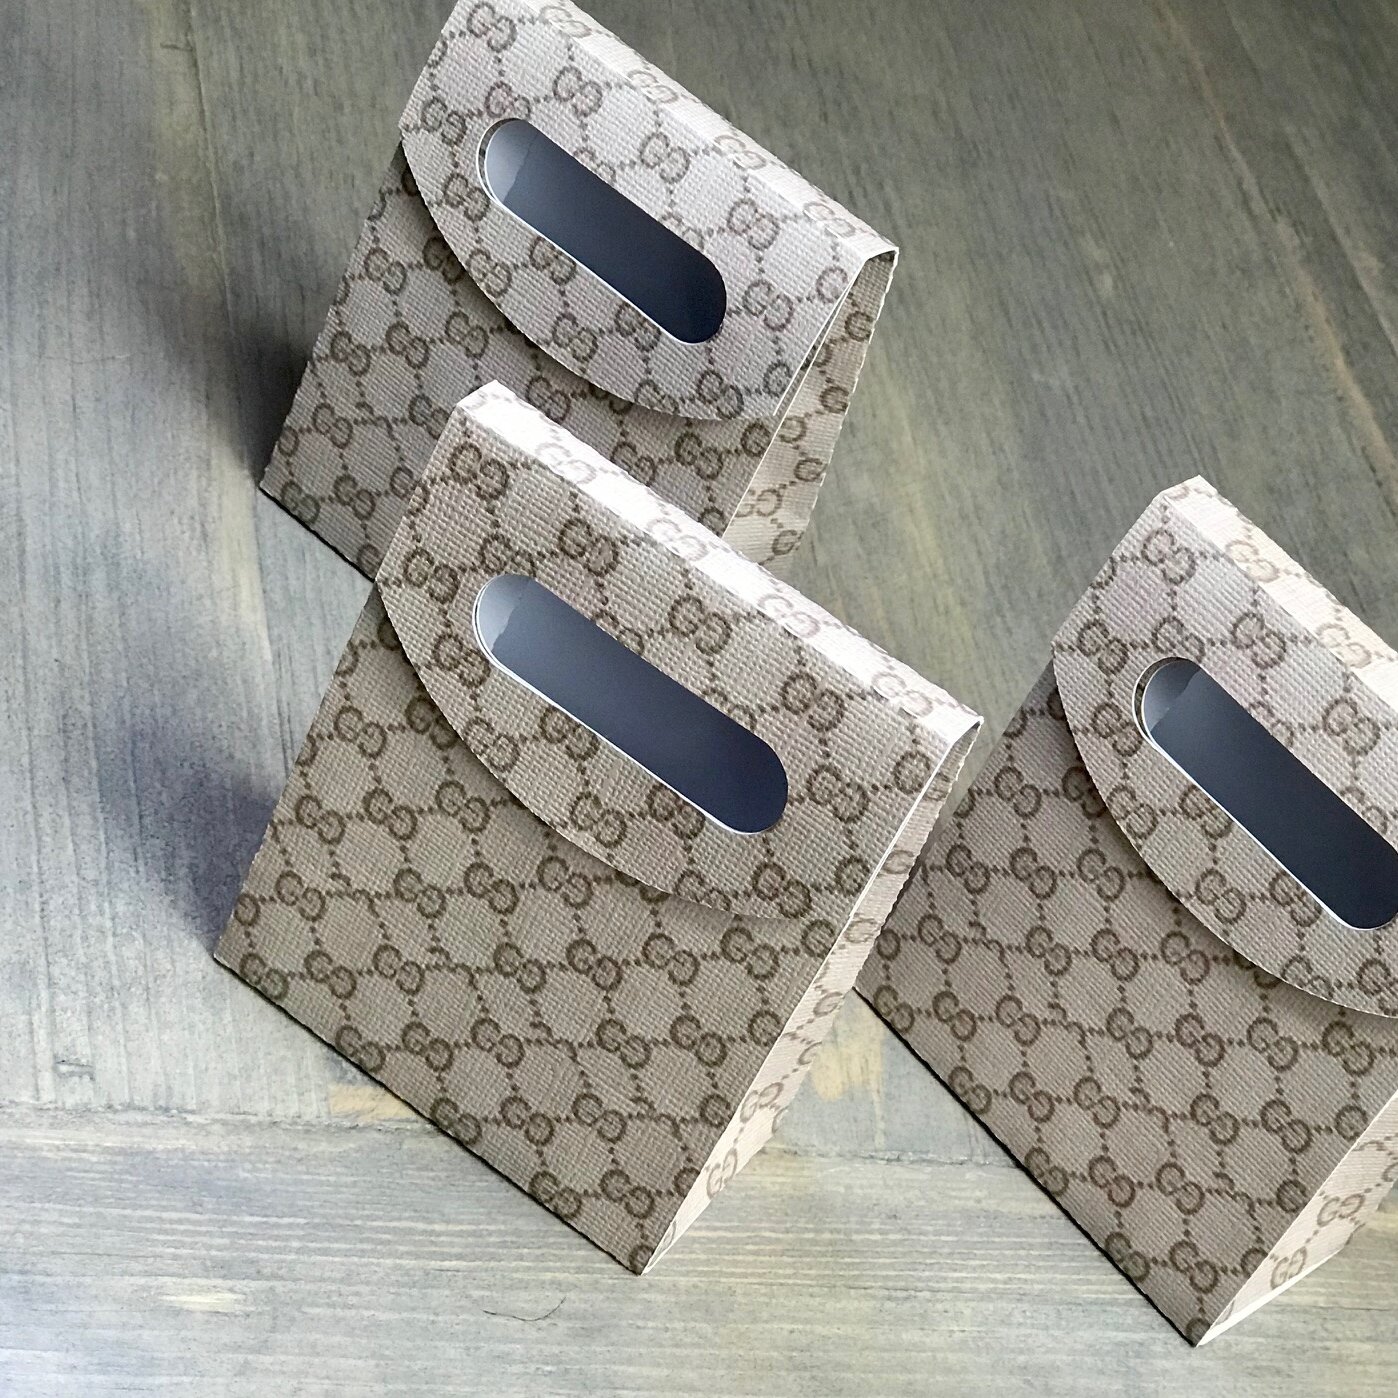 Gucci Favor Bags — Luxury Party Items